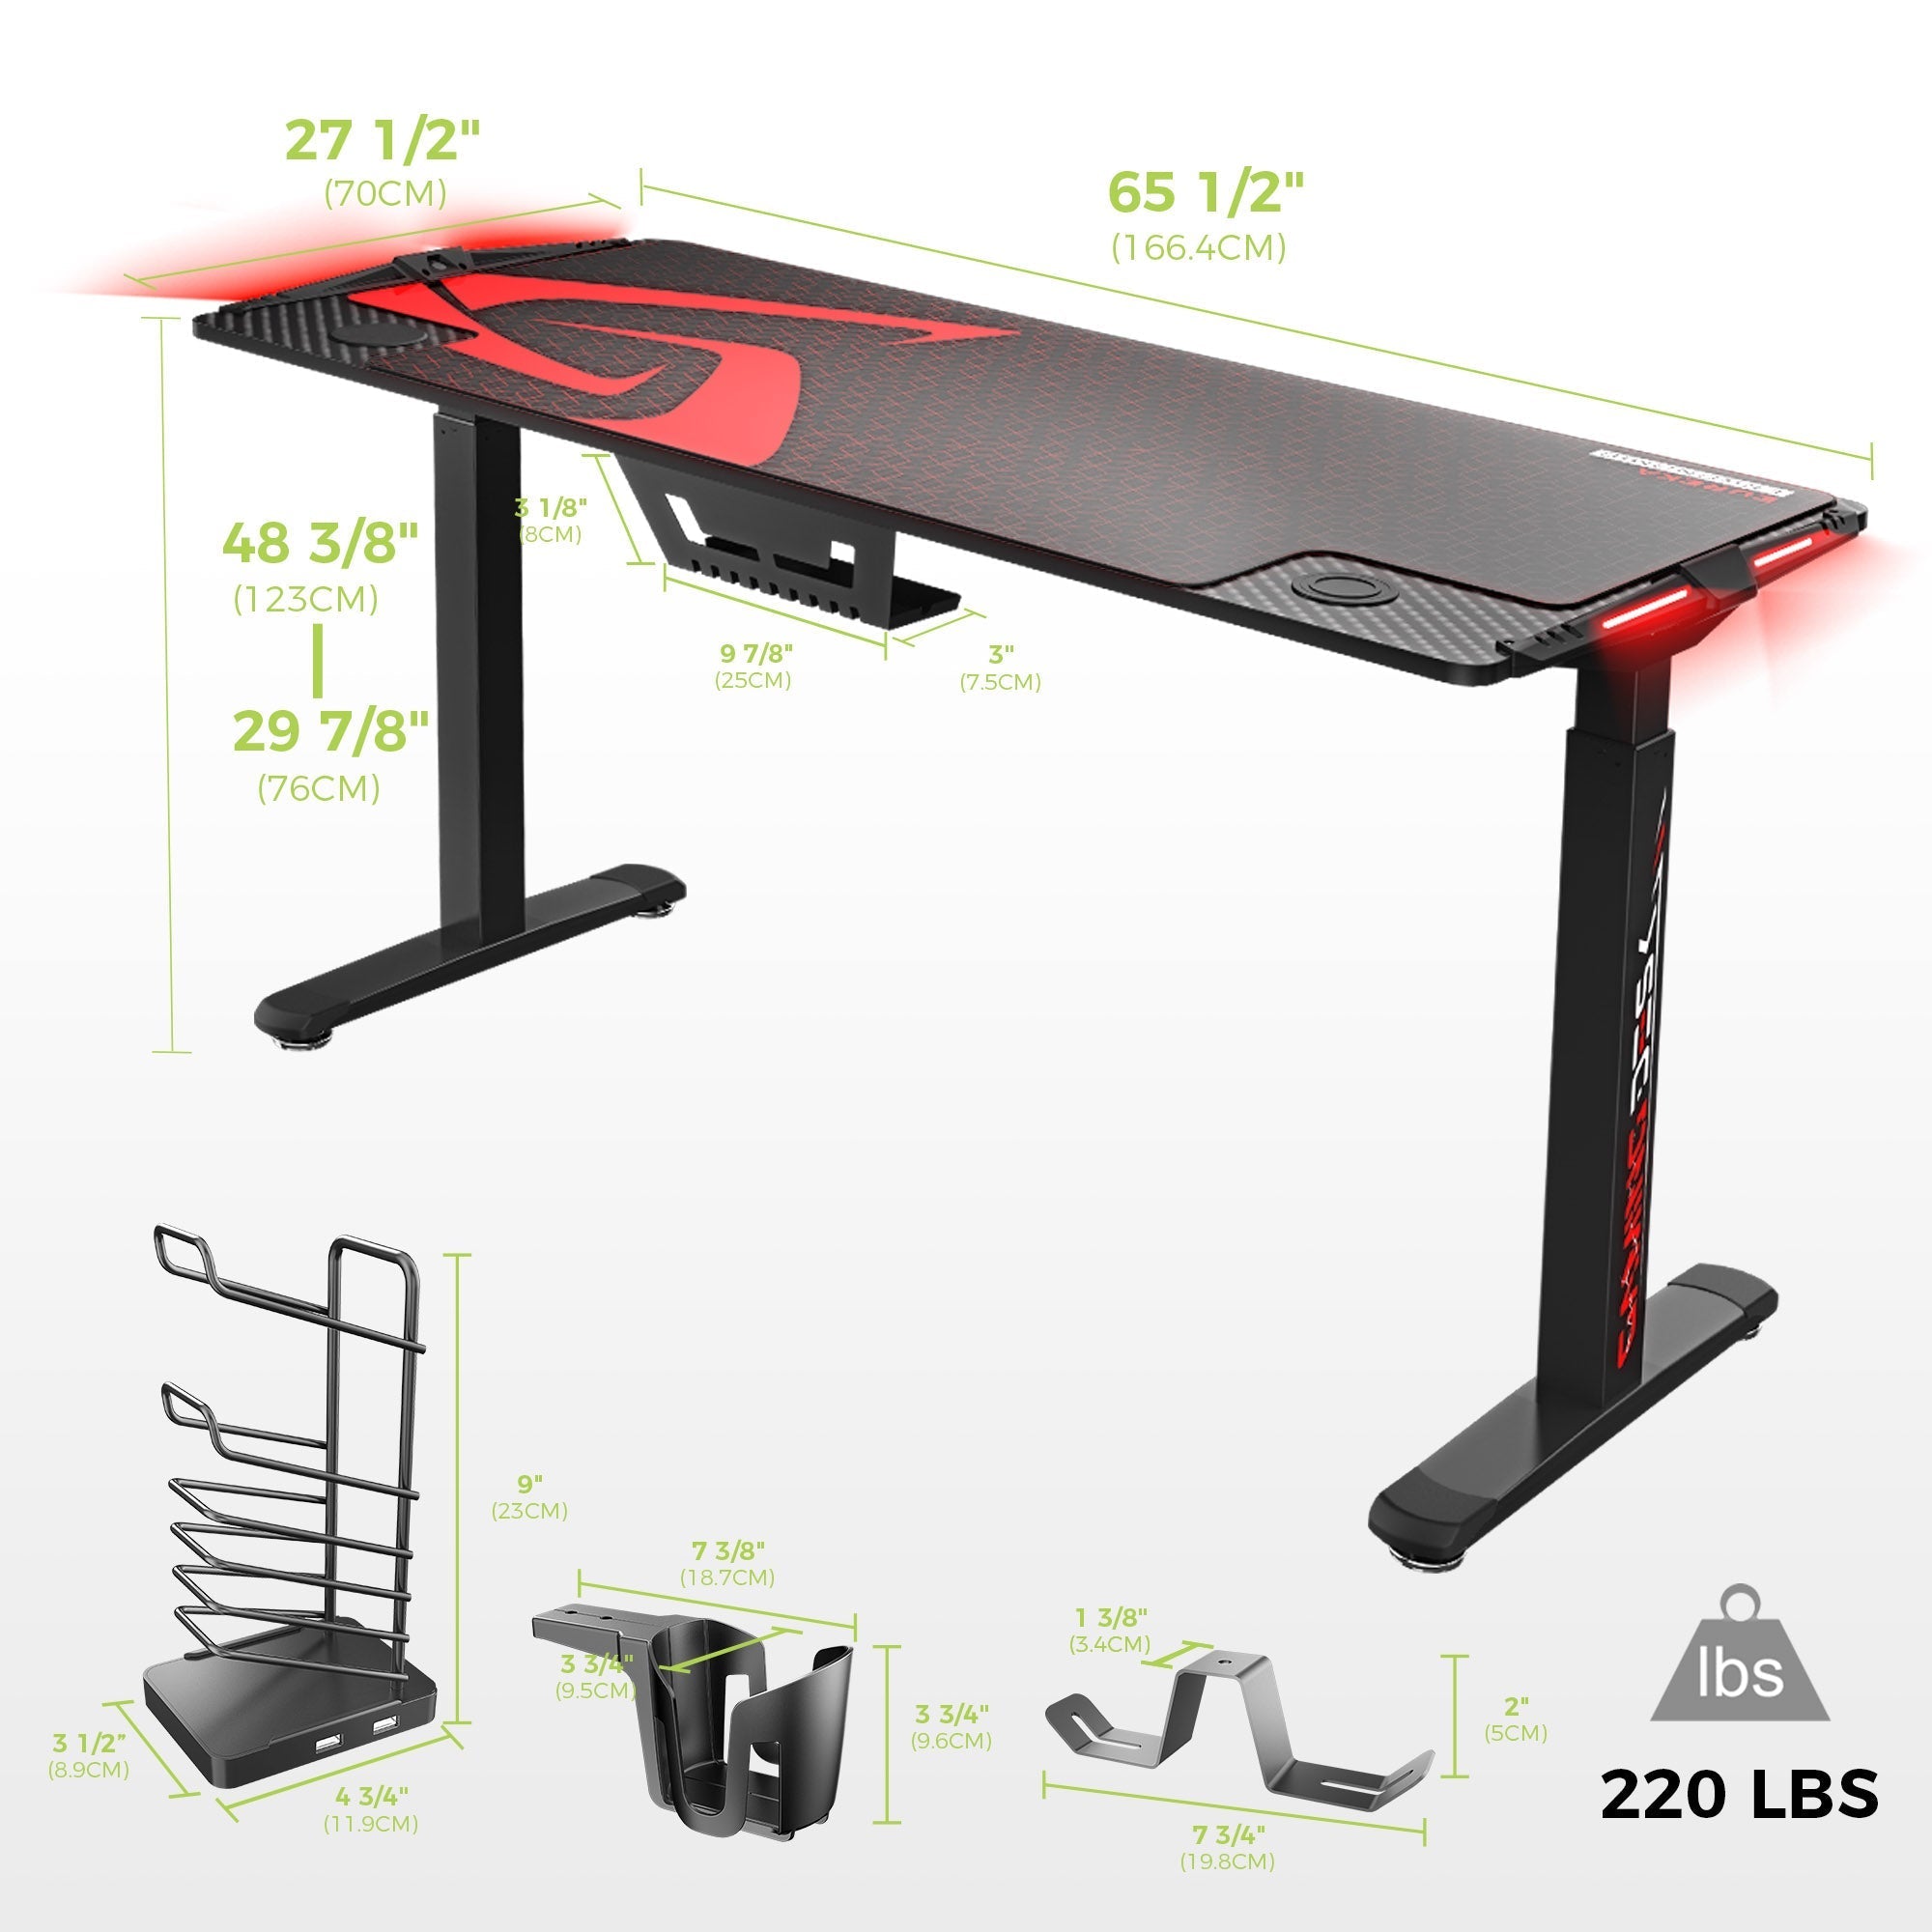 (Renewed) Eureka Ergonomic Gaming Table- 65 Inches, Electric Height Adjustable Dual Motor with RGB LED Lights